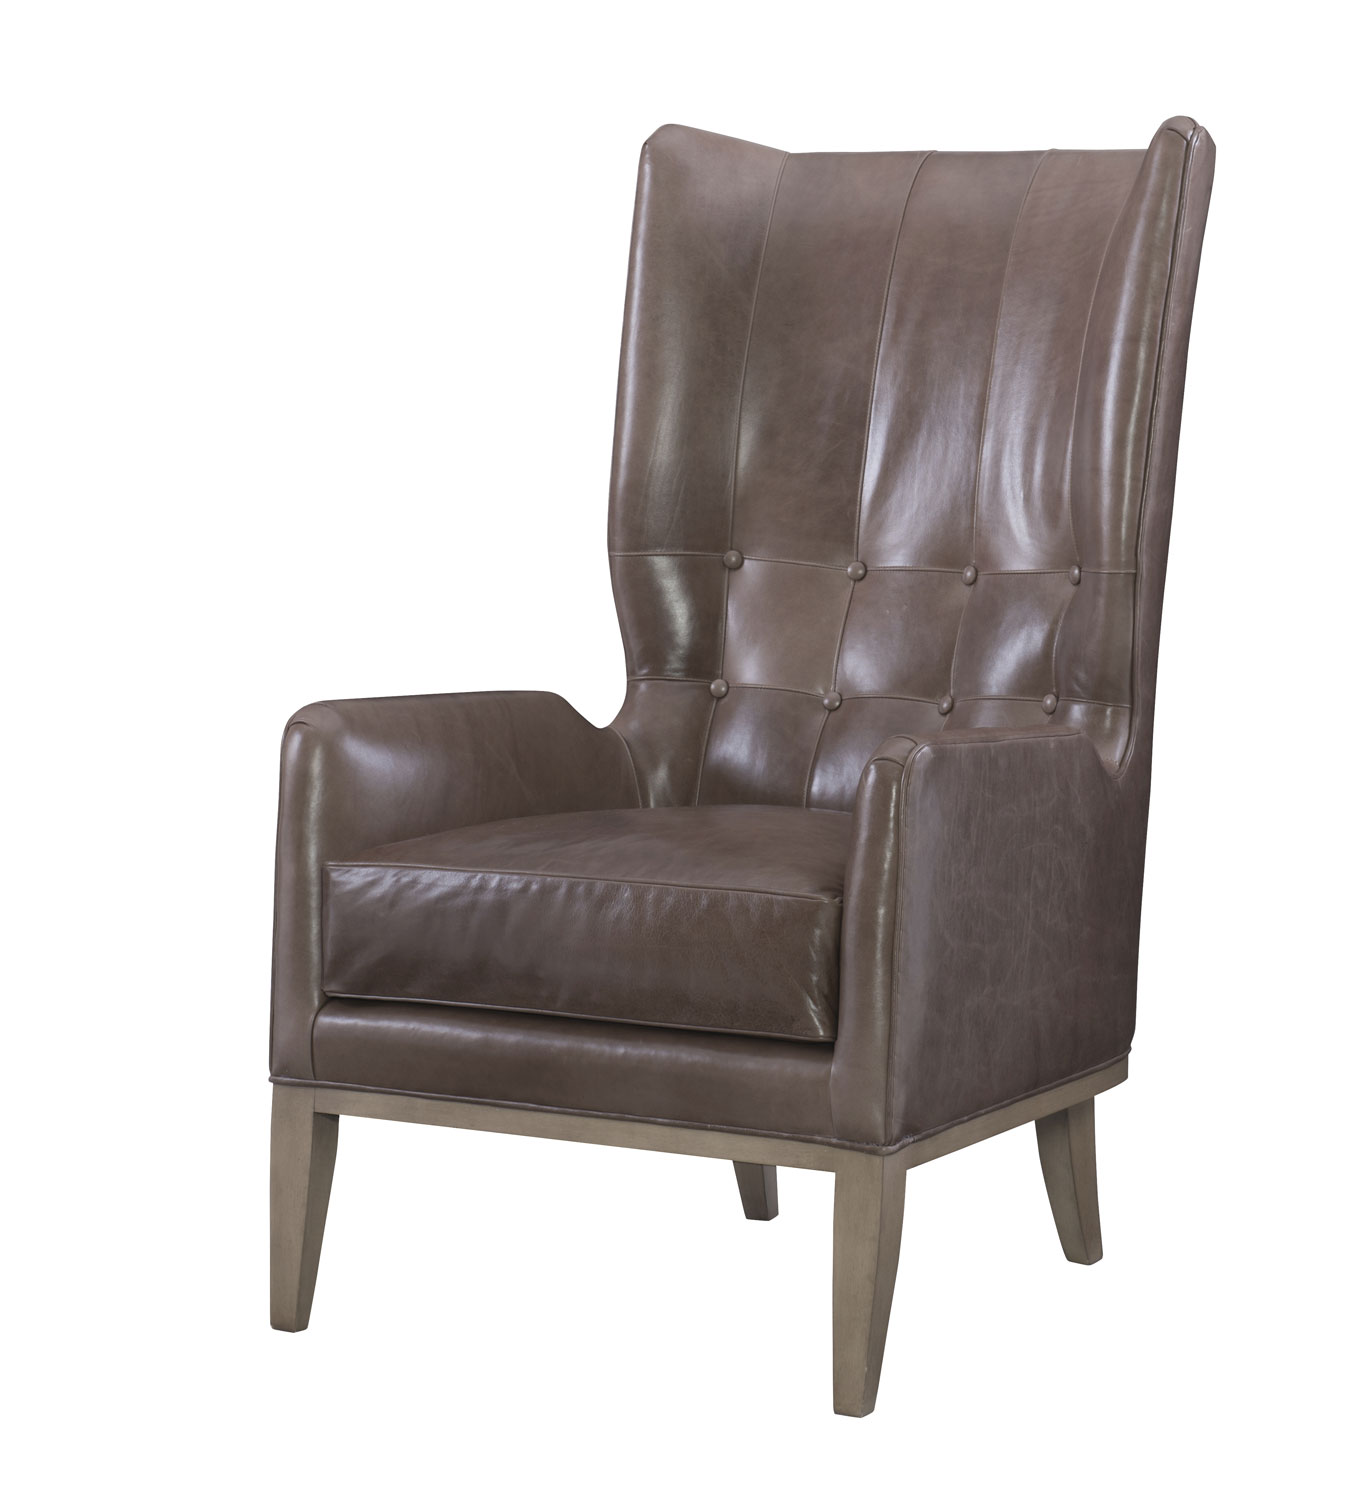 Wesley Hall PL585 Foremost Leather Chair